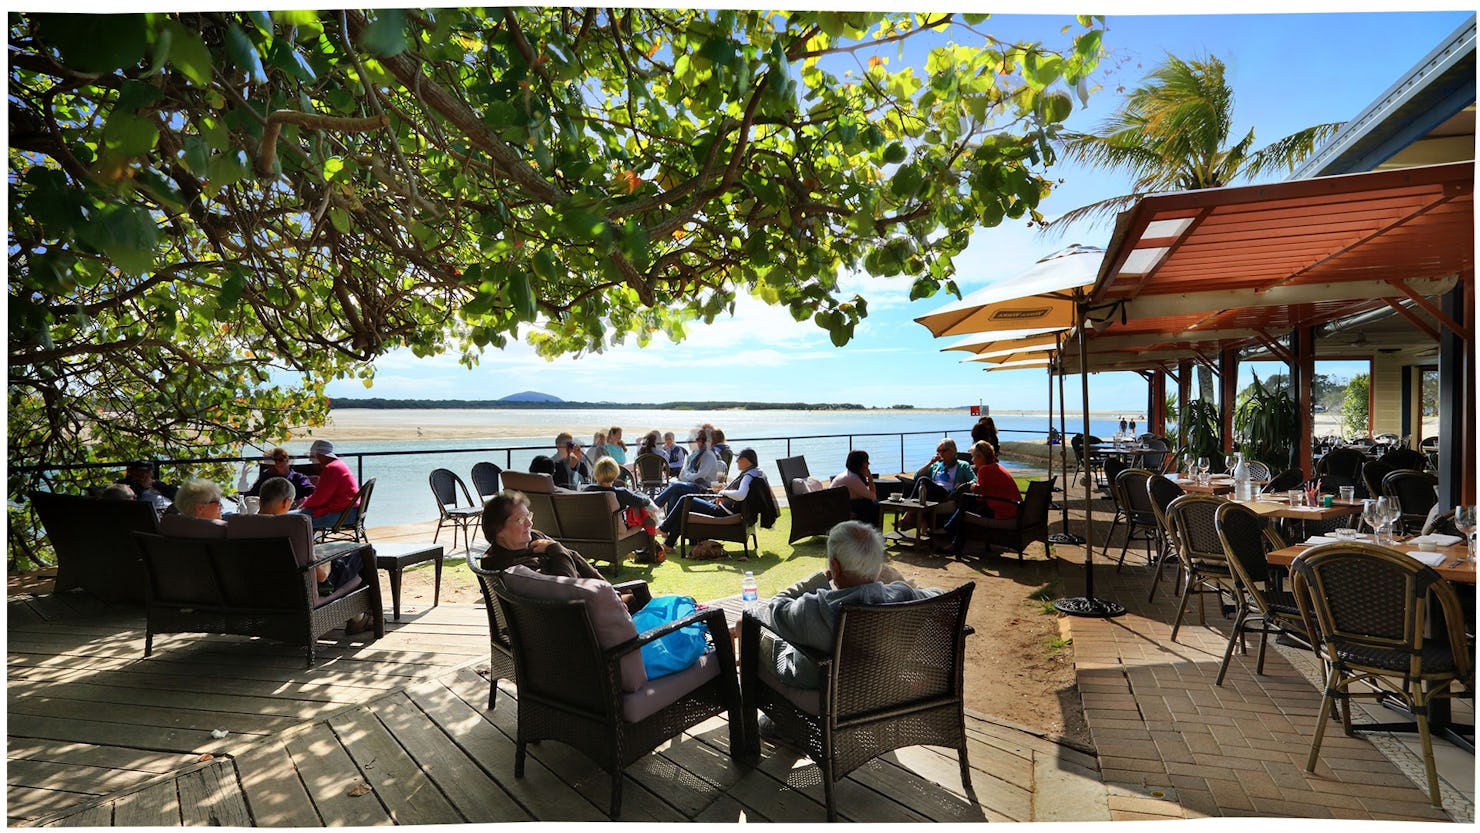 The Boatshed, Cotton Tree